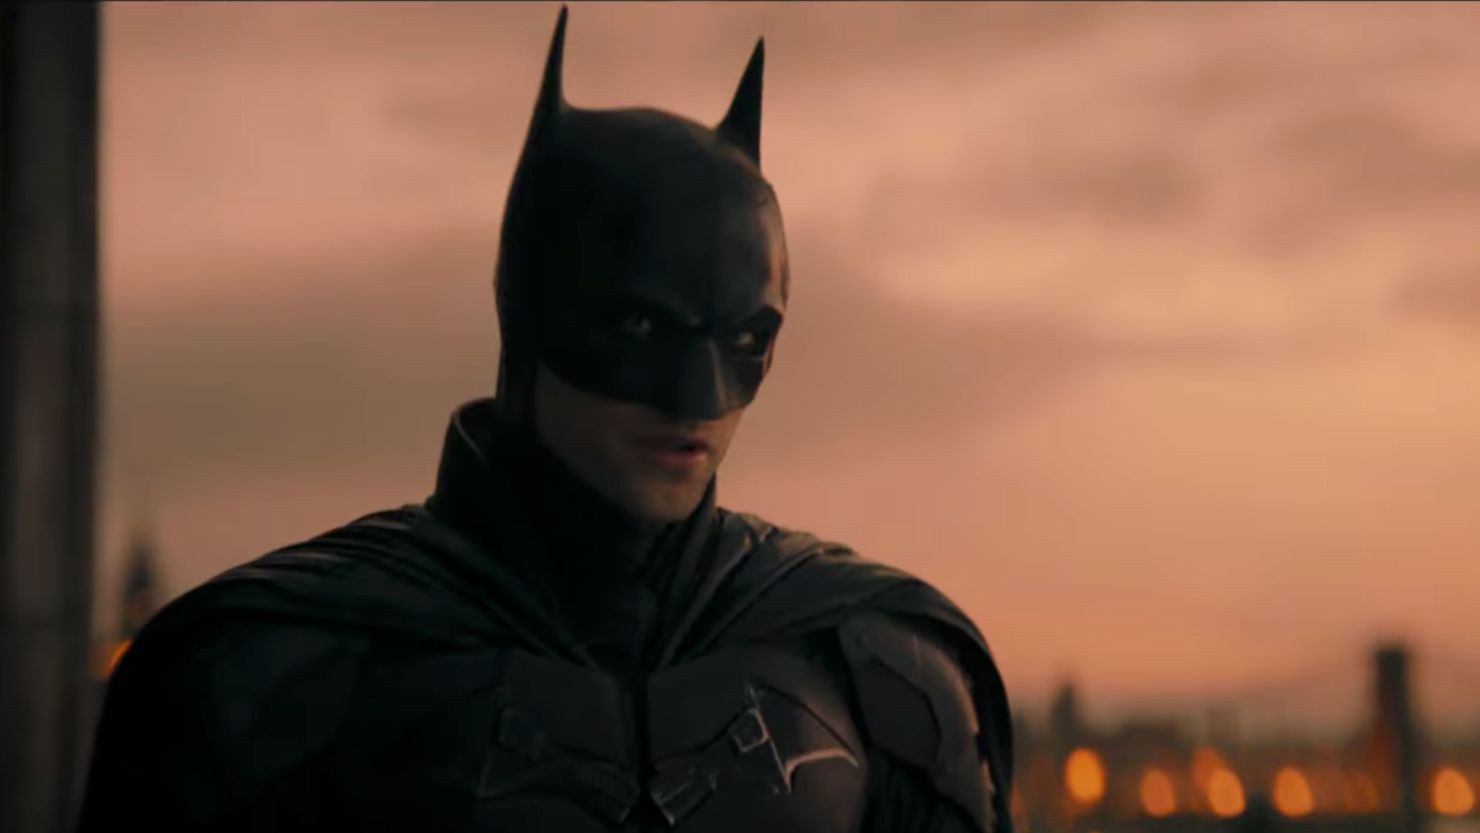 The Batman' flies high with its dark and serious Dark Knight, but